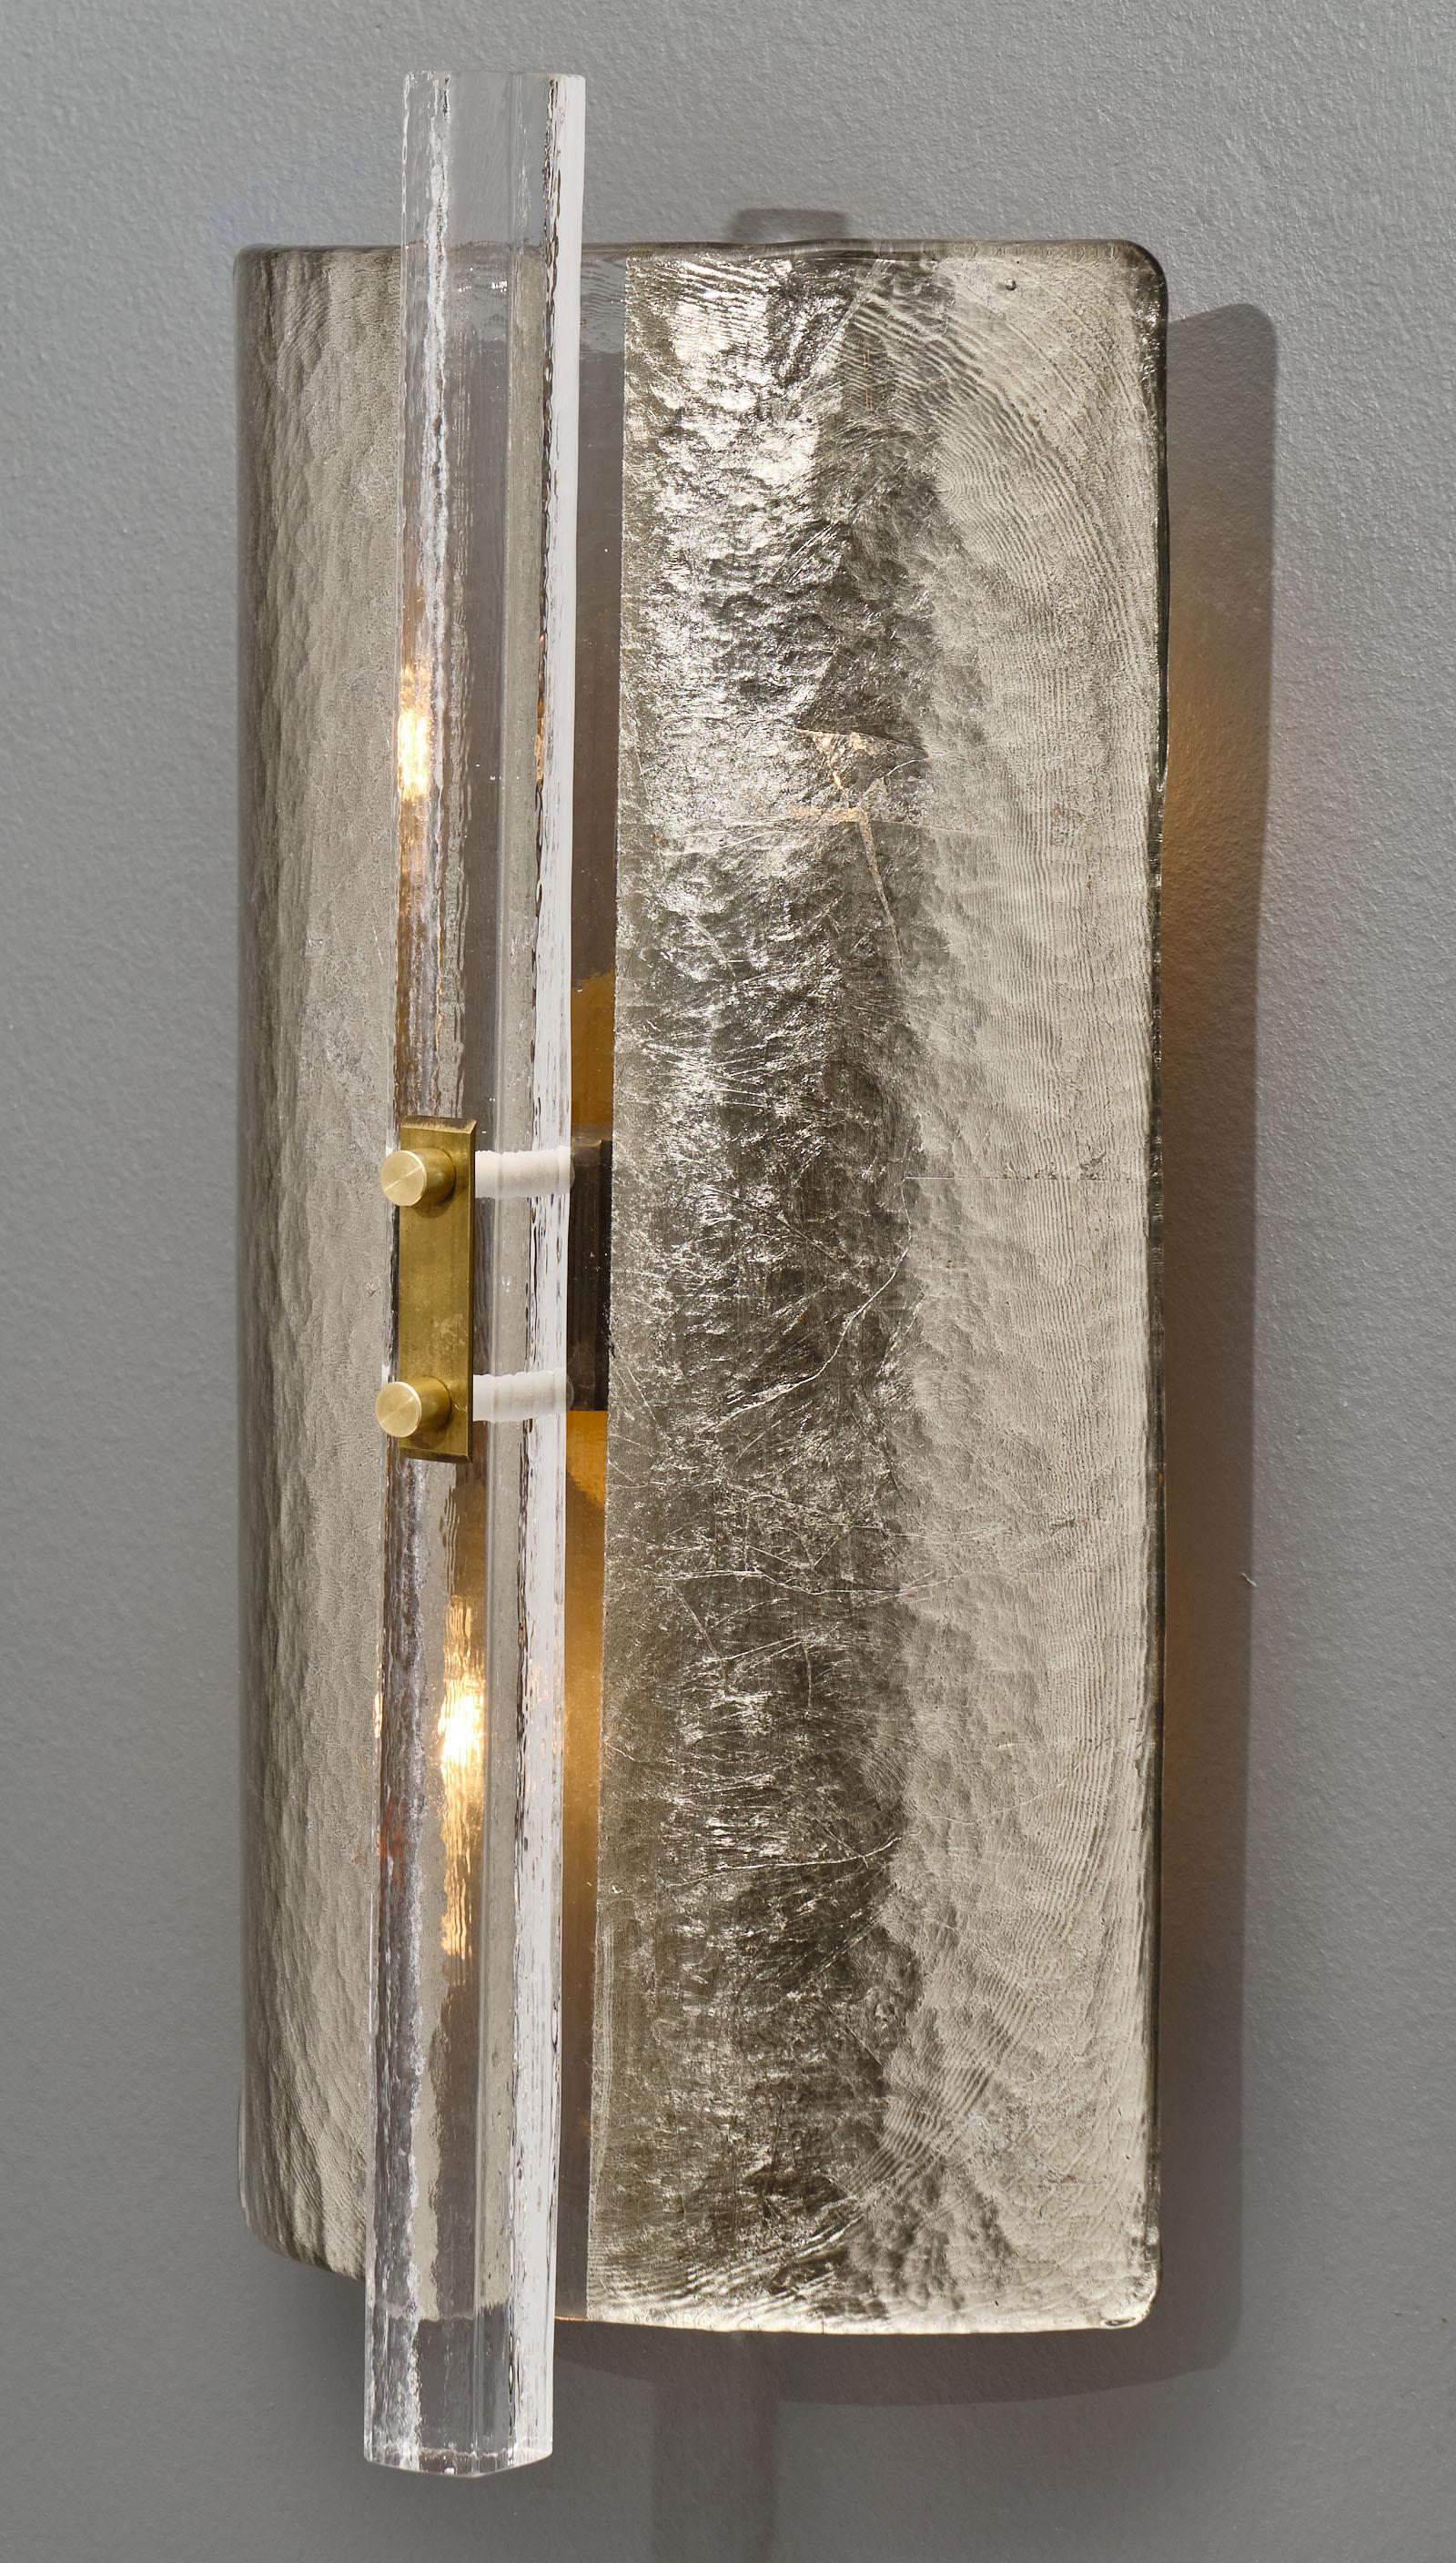 Silver leaf murano glass sconces from Italy with thick textured glass lined with silver leaf and featuring a rectangle glass rod held in place by brass hardware. This pair has been newly wired to fit US standards.

This pair is currently located